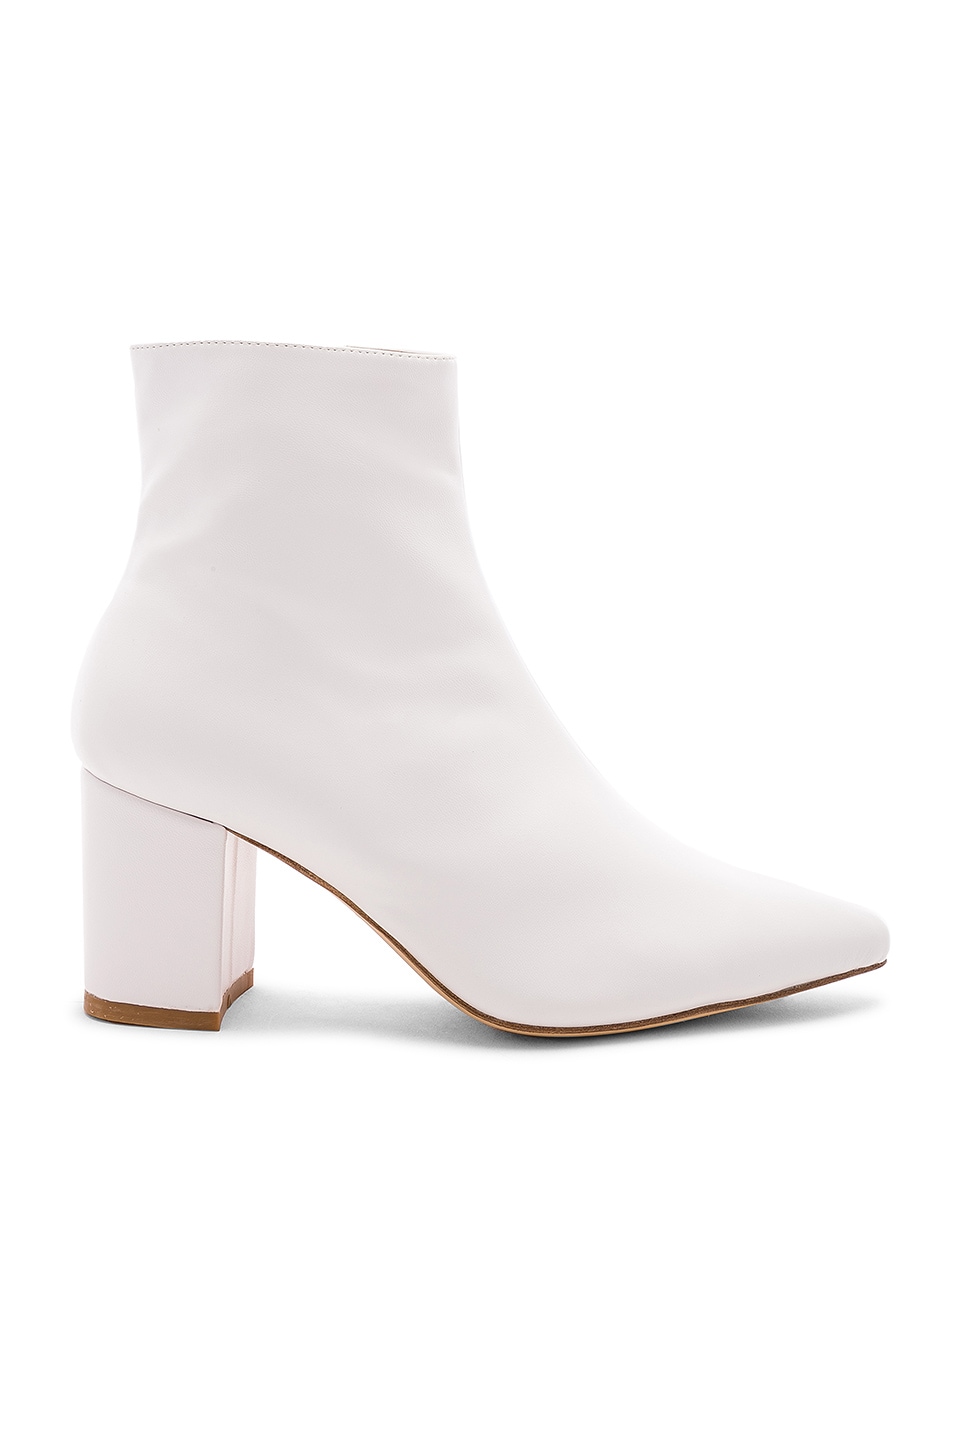 RAYE As If Bootie in White | REVOLVE